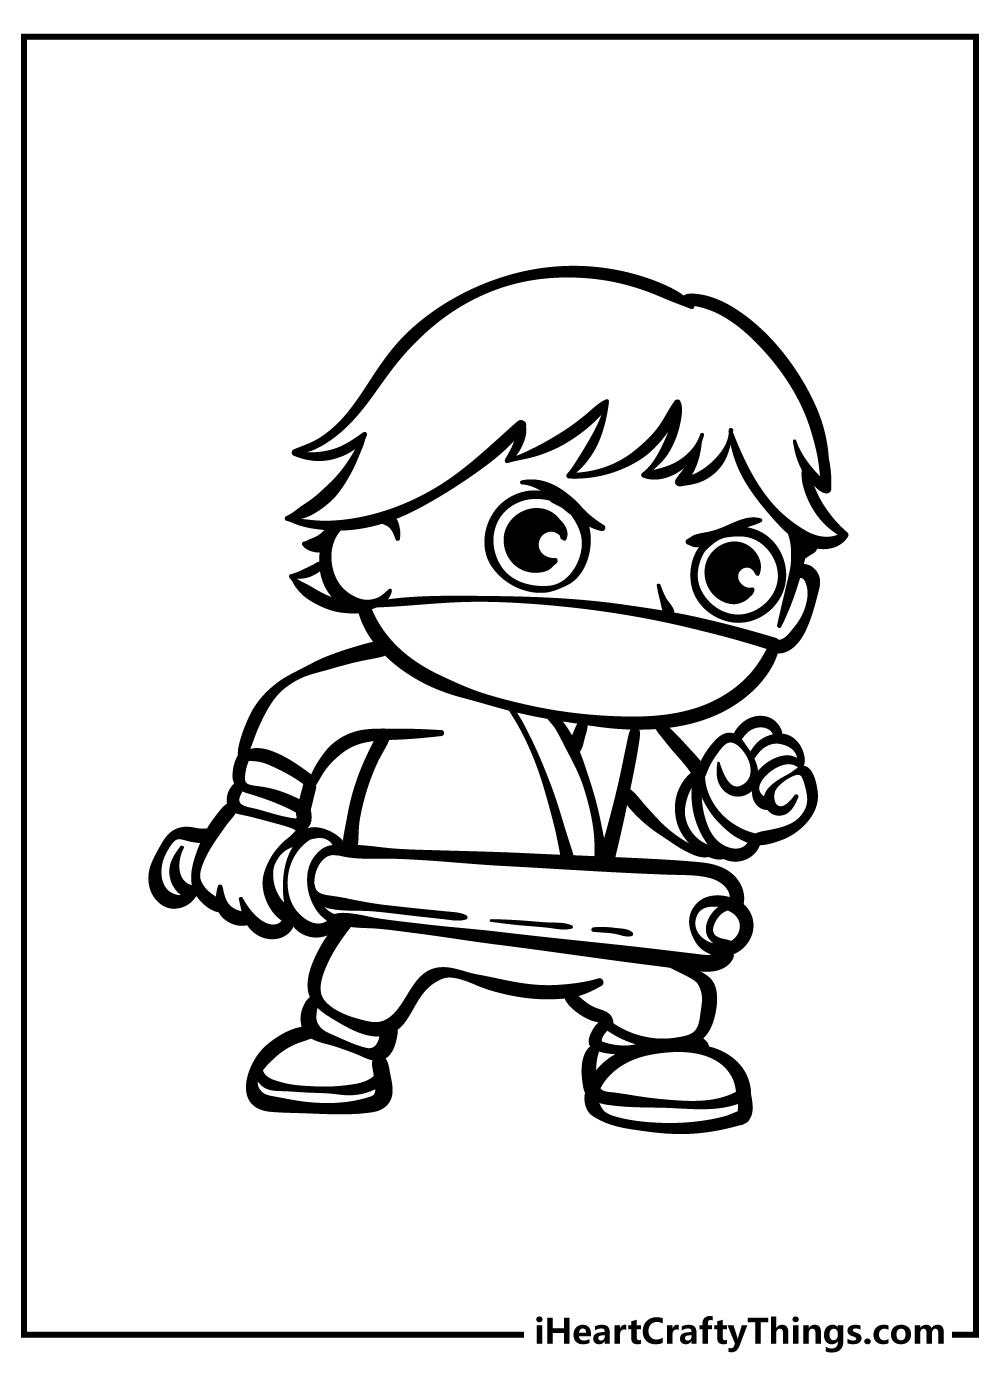 Ryan Easy Coloring Pages